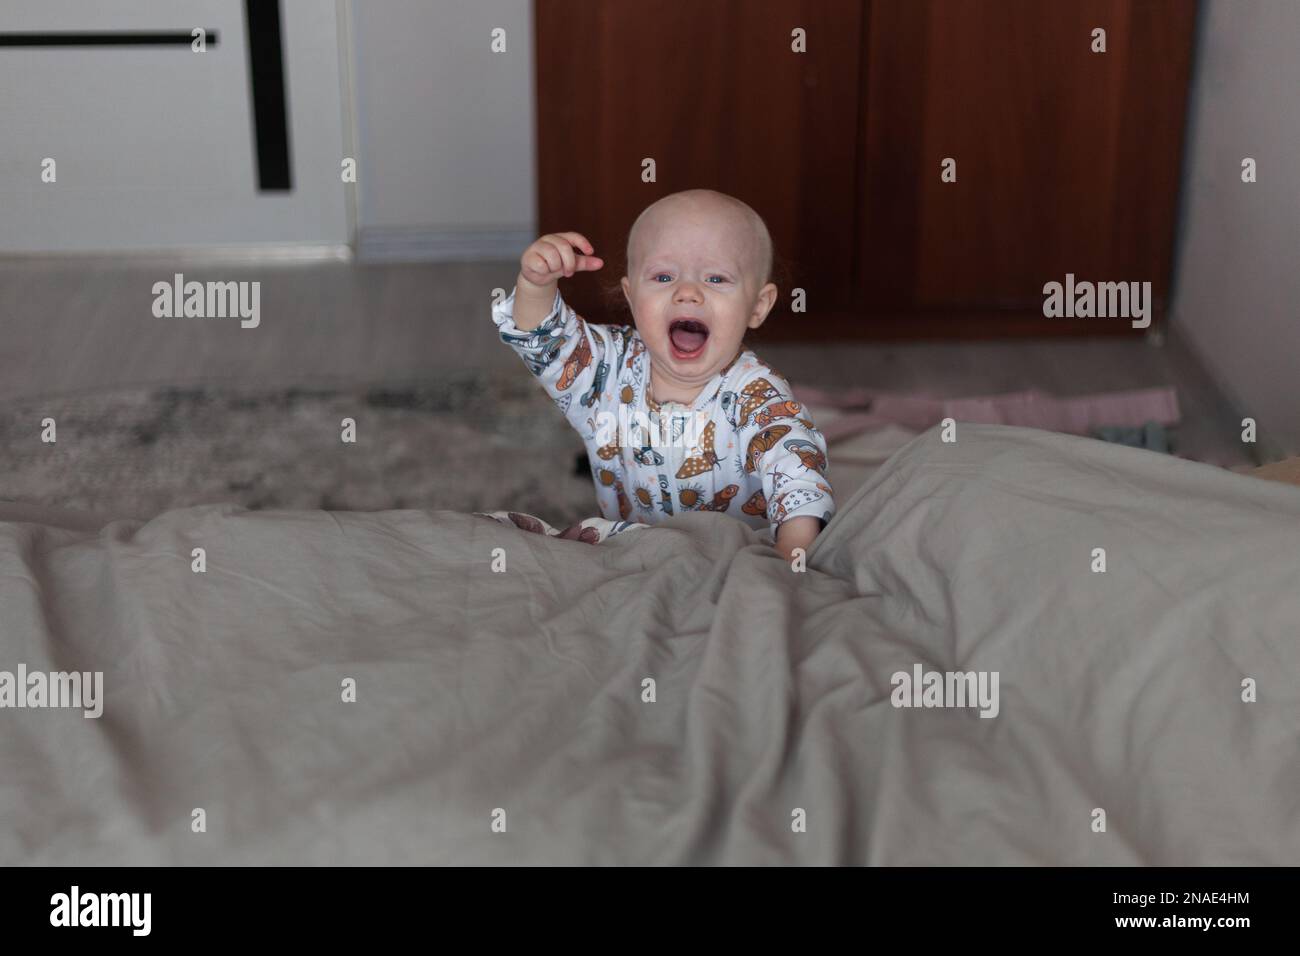 Ð¡hild screaming with raised hand near bed Stock Photo